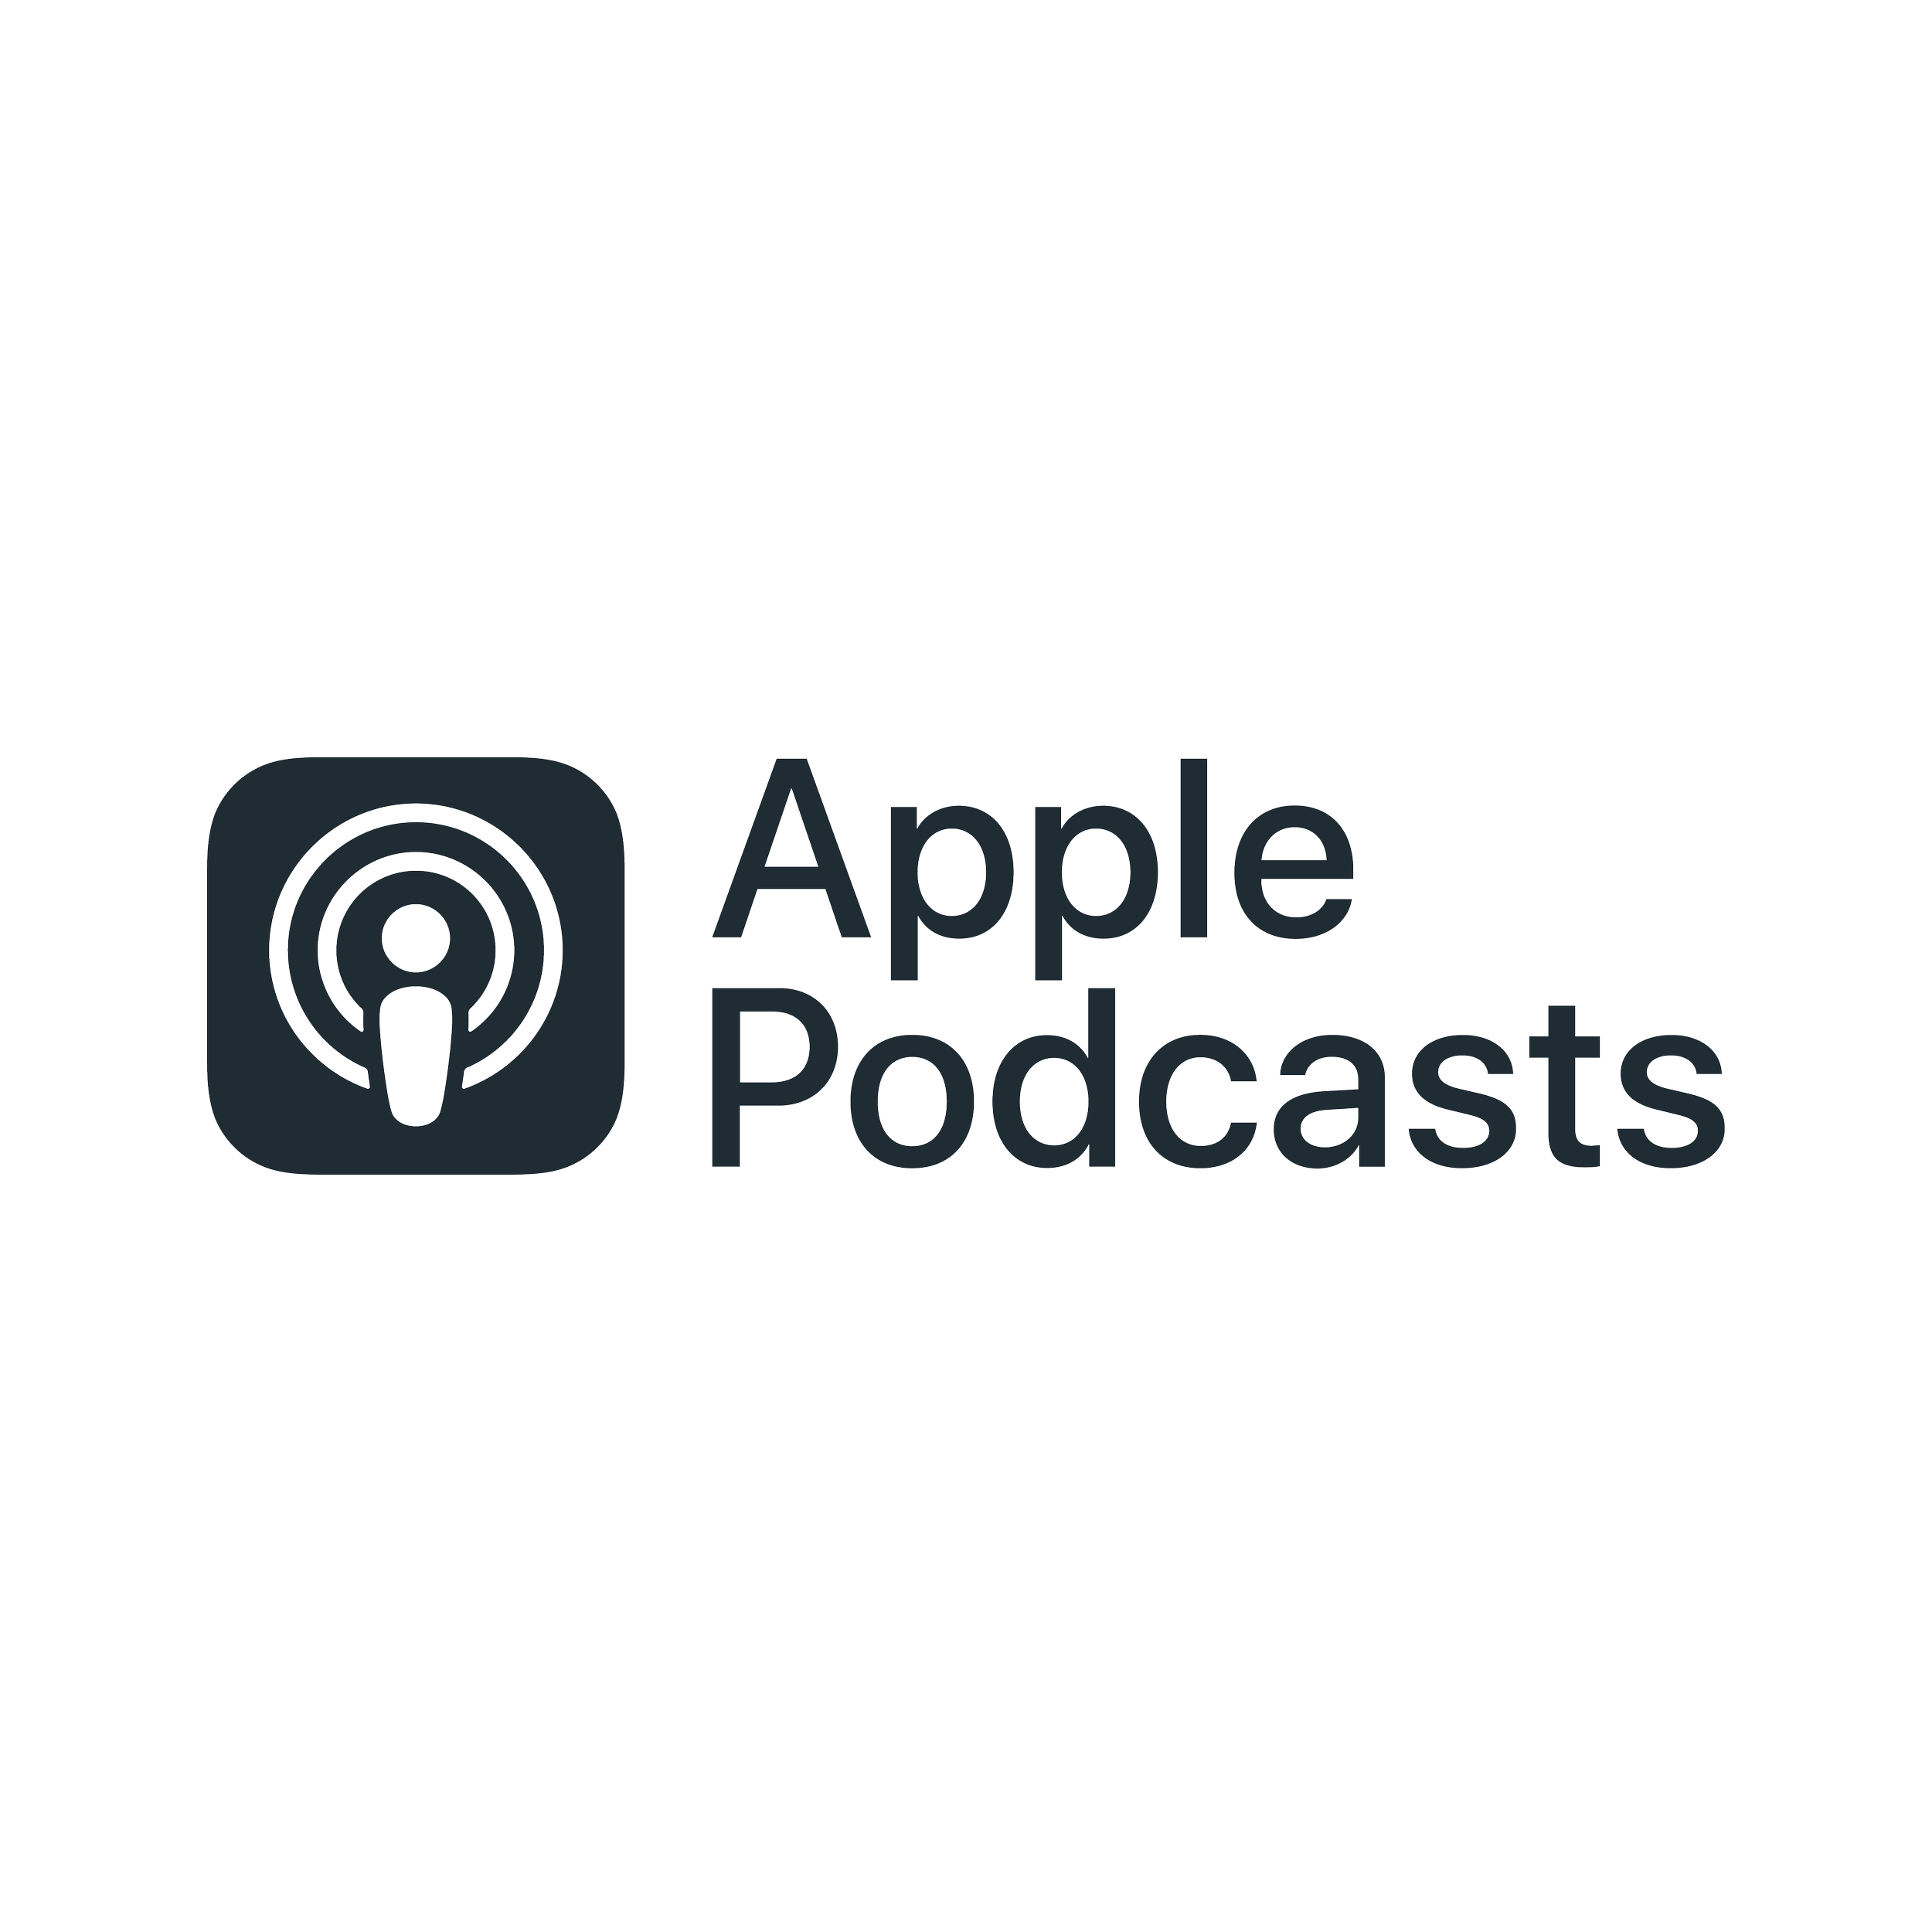 Podcast App Logos_Apple Podcasts Dark.png